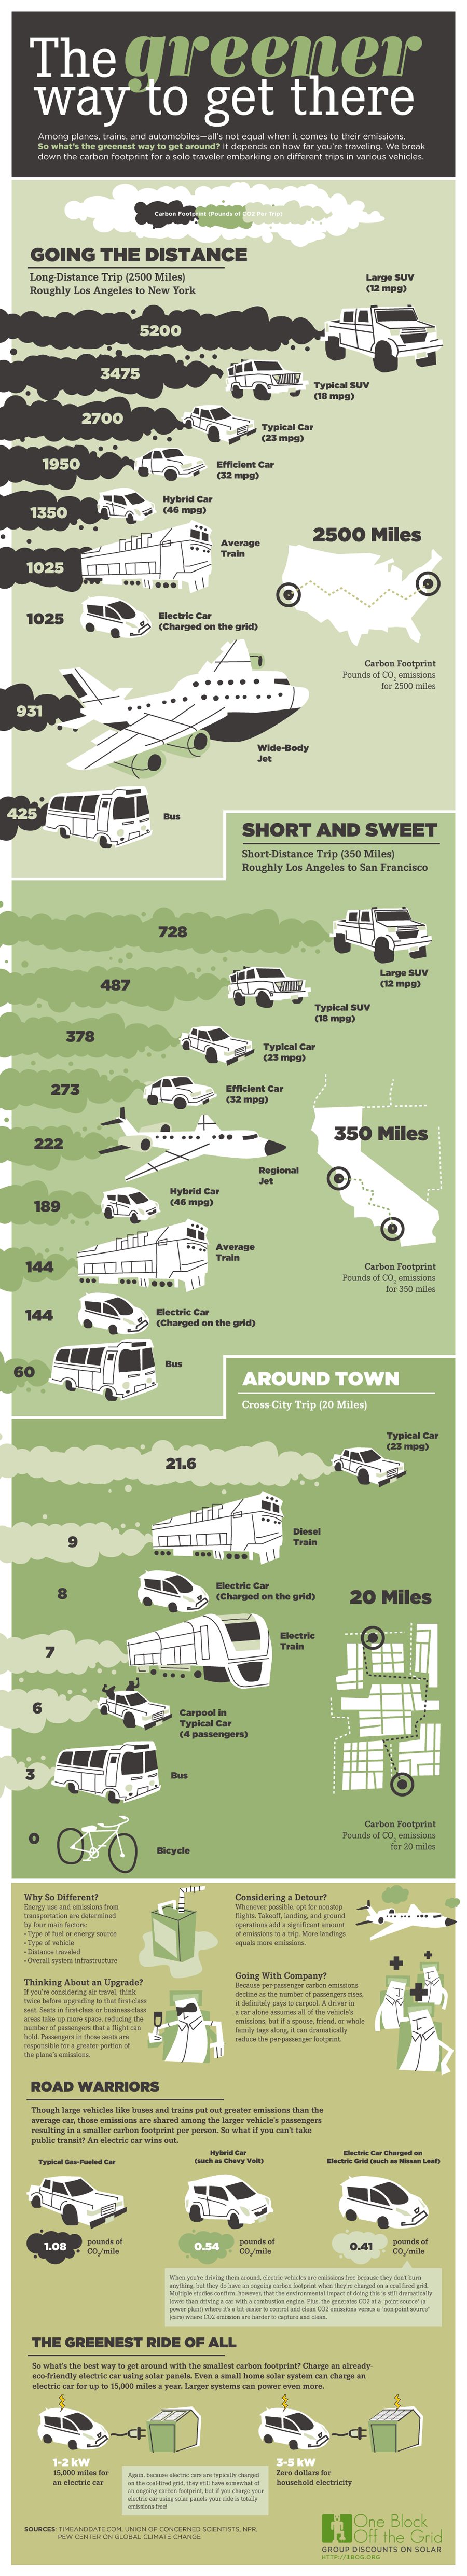 infographic-greener-way-to-get-there1